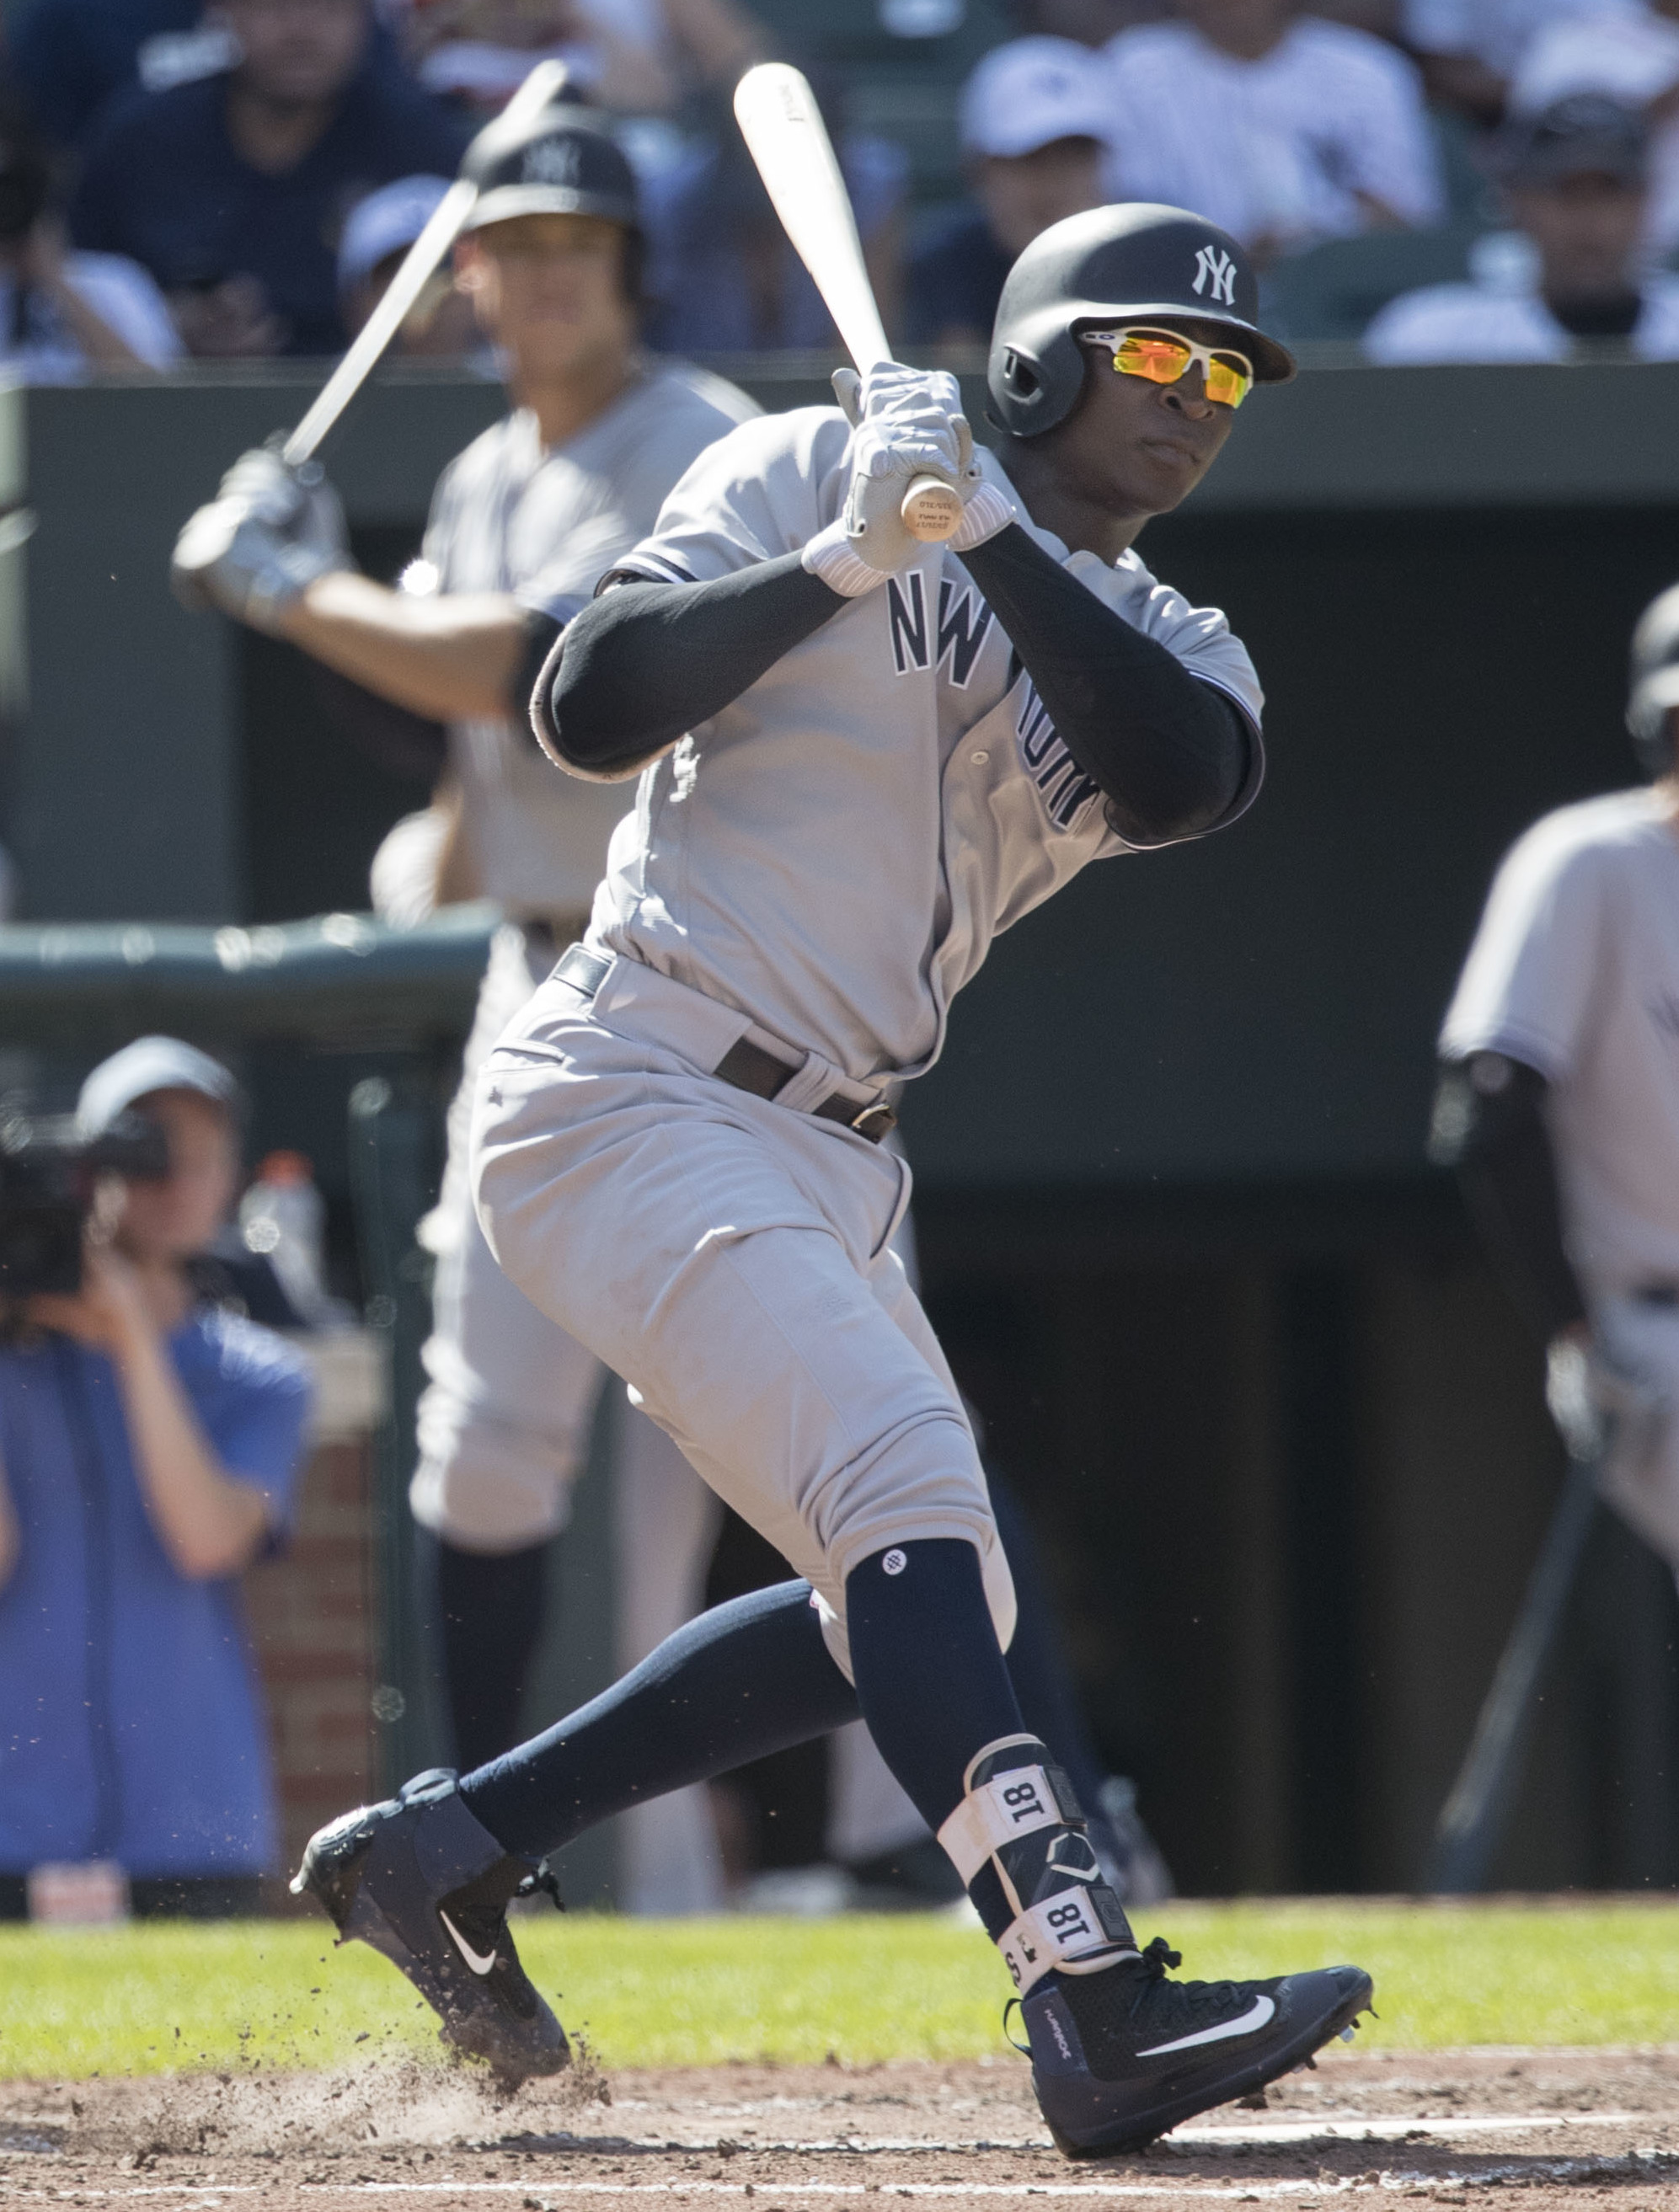 Phillies: How does Didi Gregorius fit into the lineup?